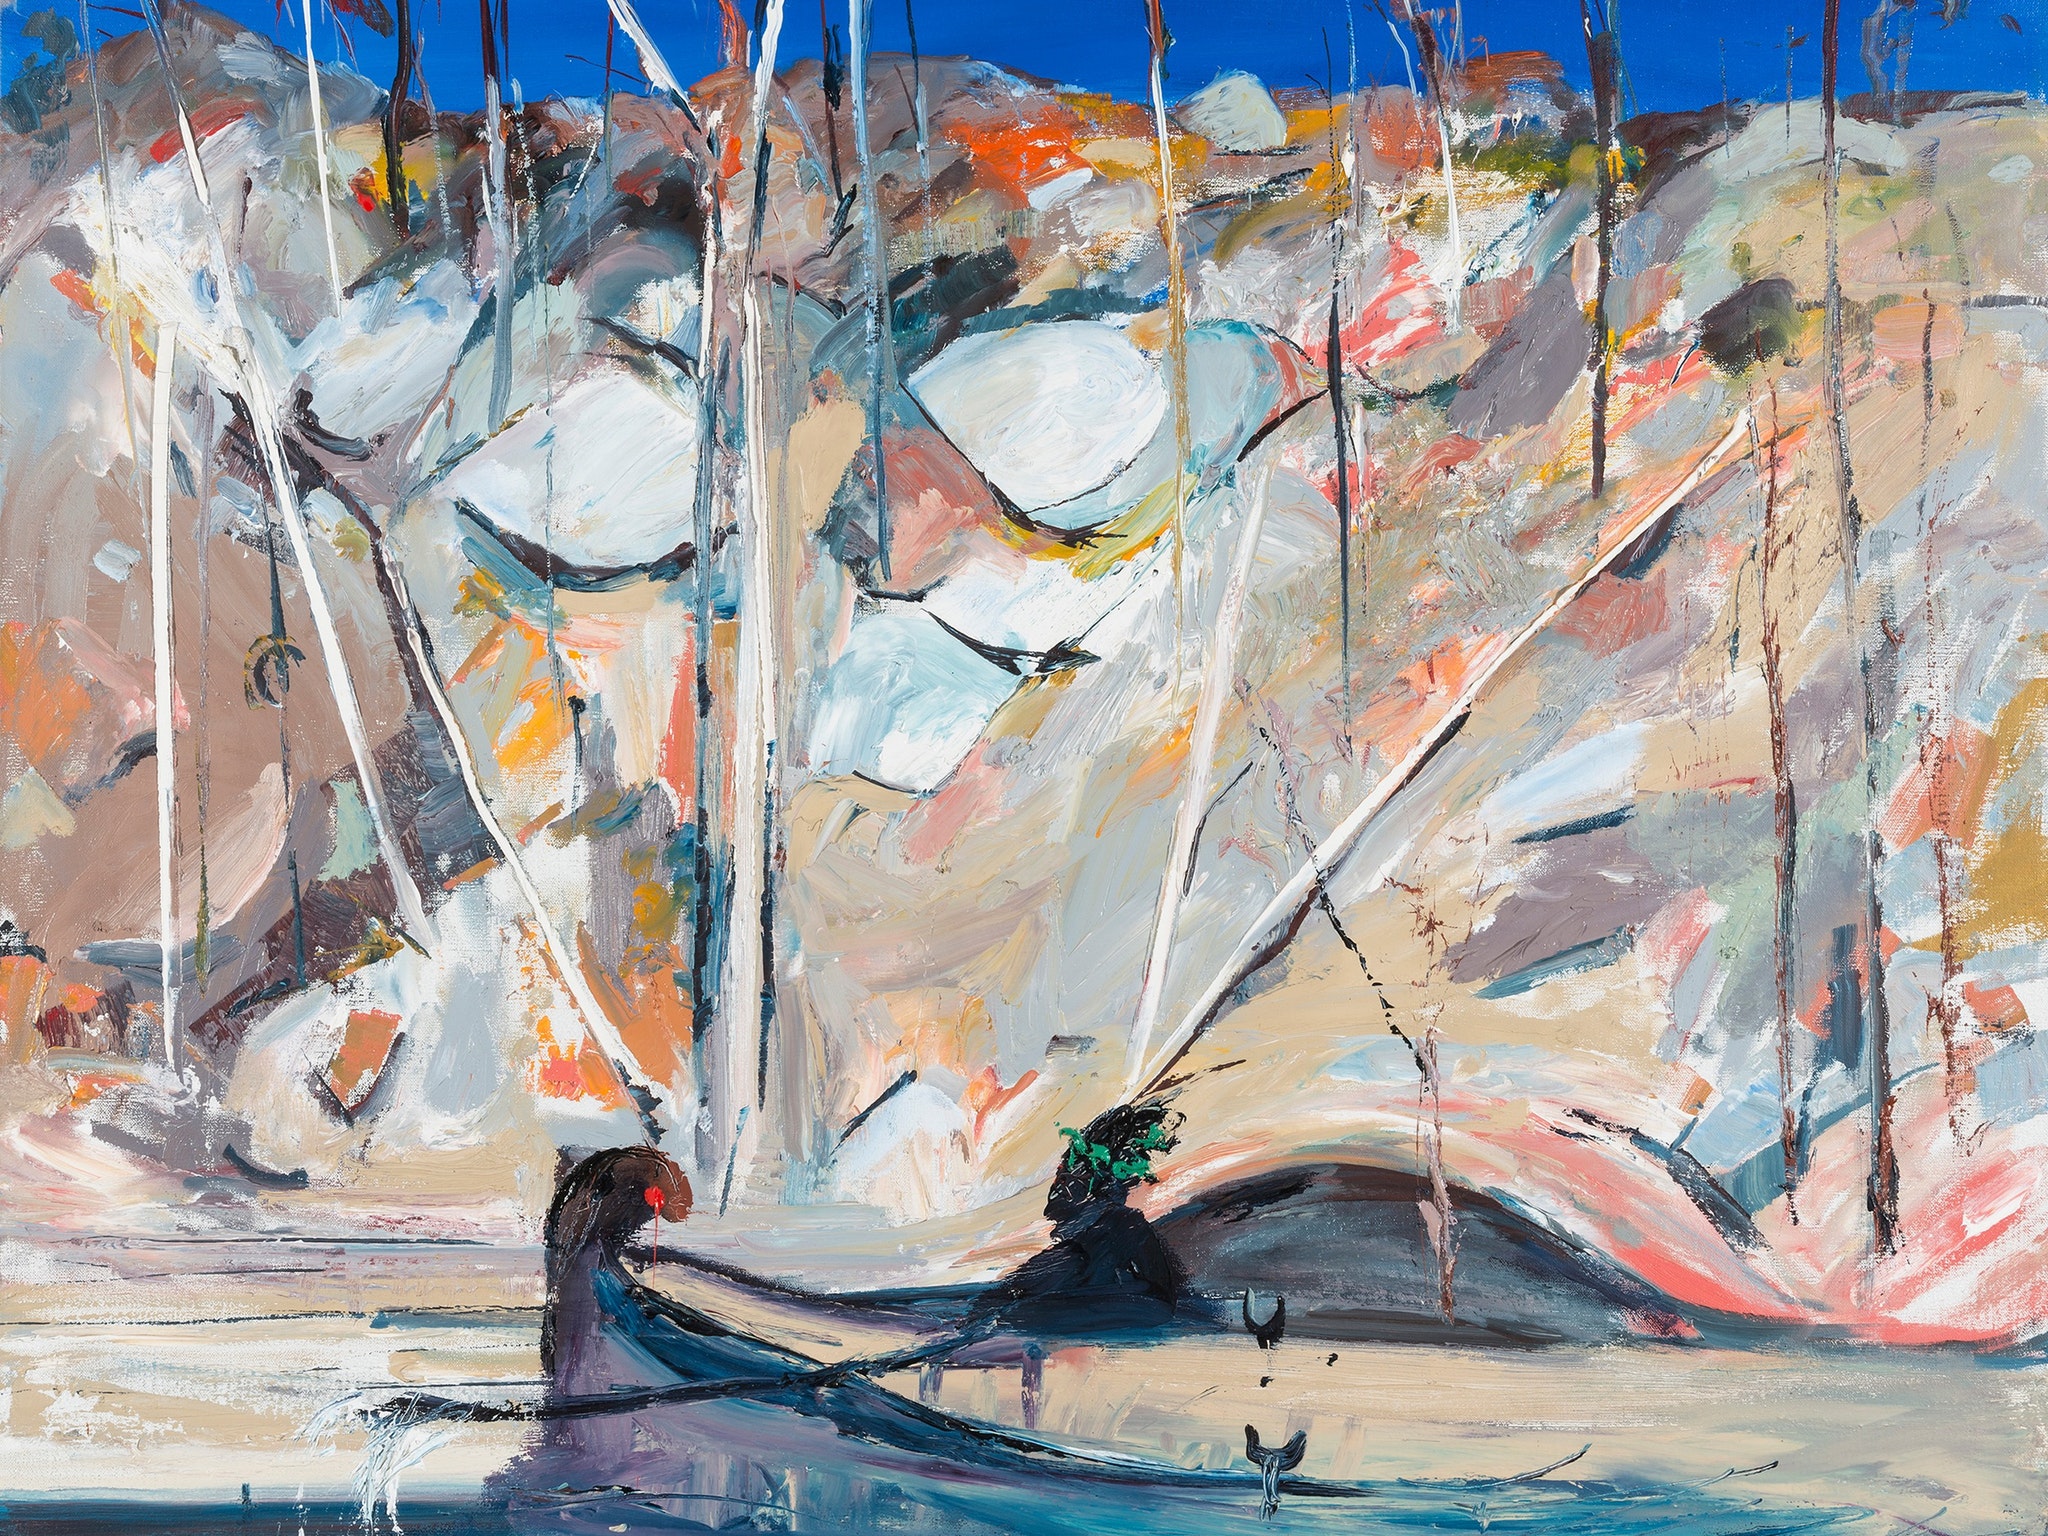 Boyd painting 2 abstract  figures in boat in landscape